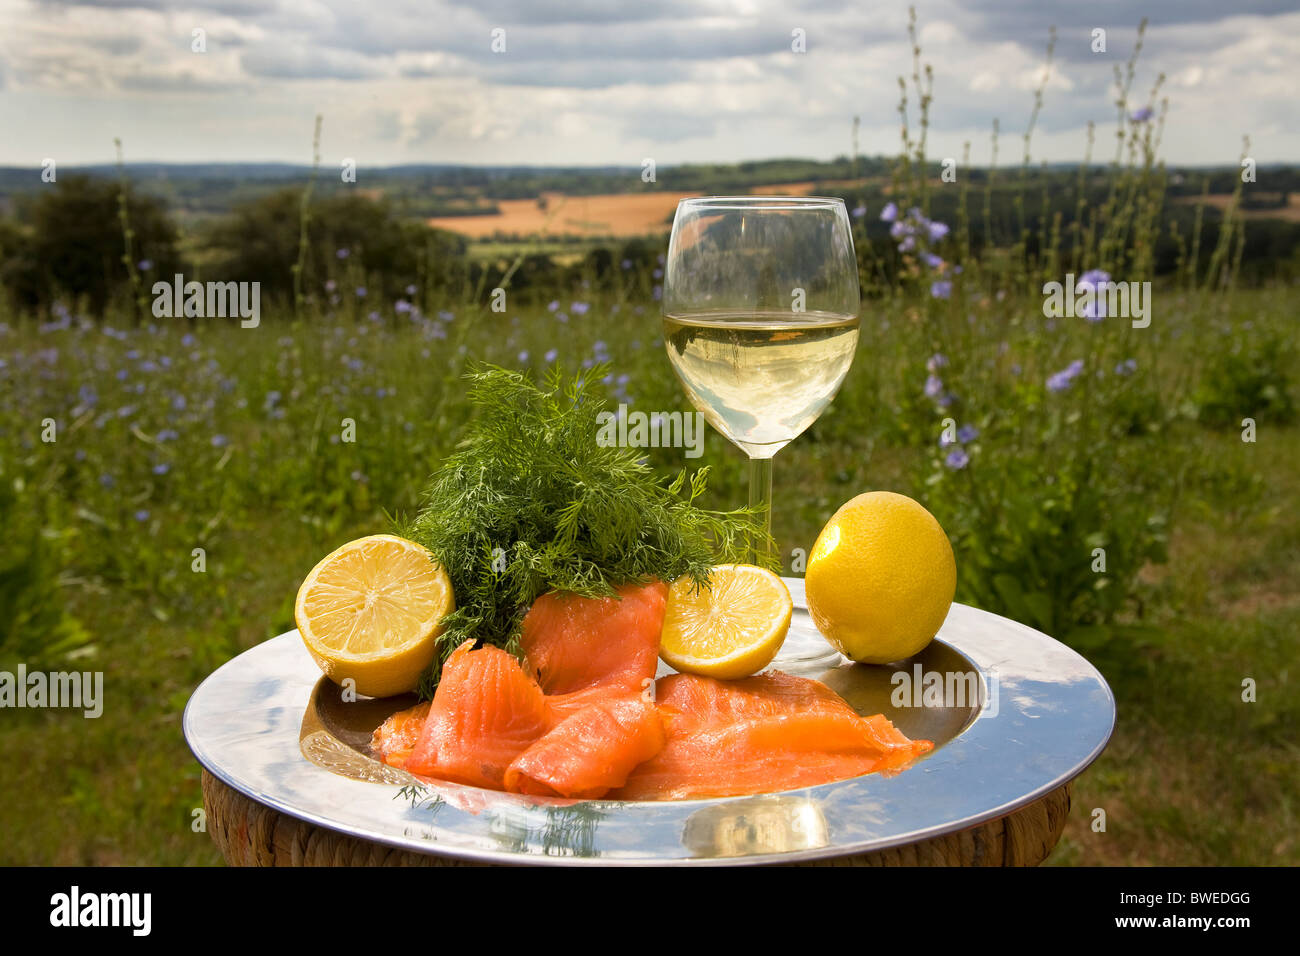 Appetizing smoked salmon dill and lemon with white wine on silver platter in the summer countryside landscape in Kent UK Stock Photo